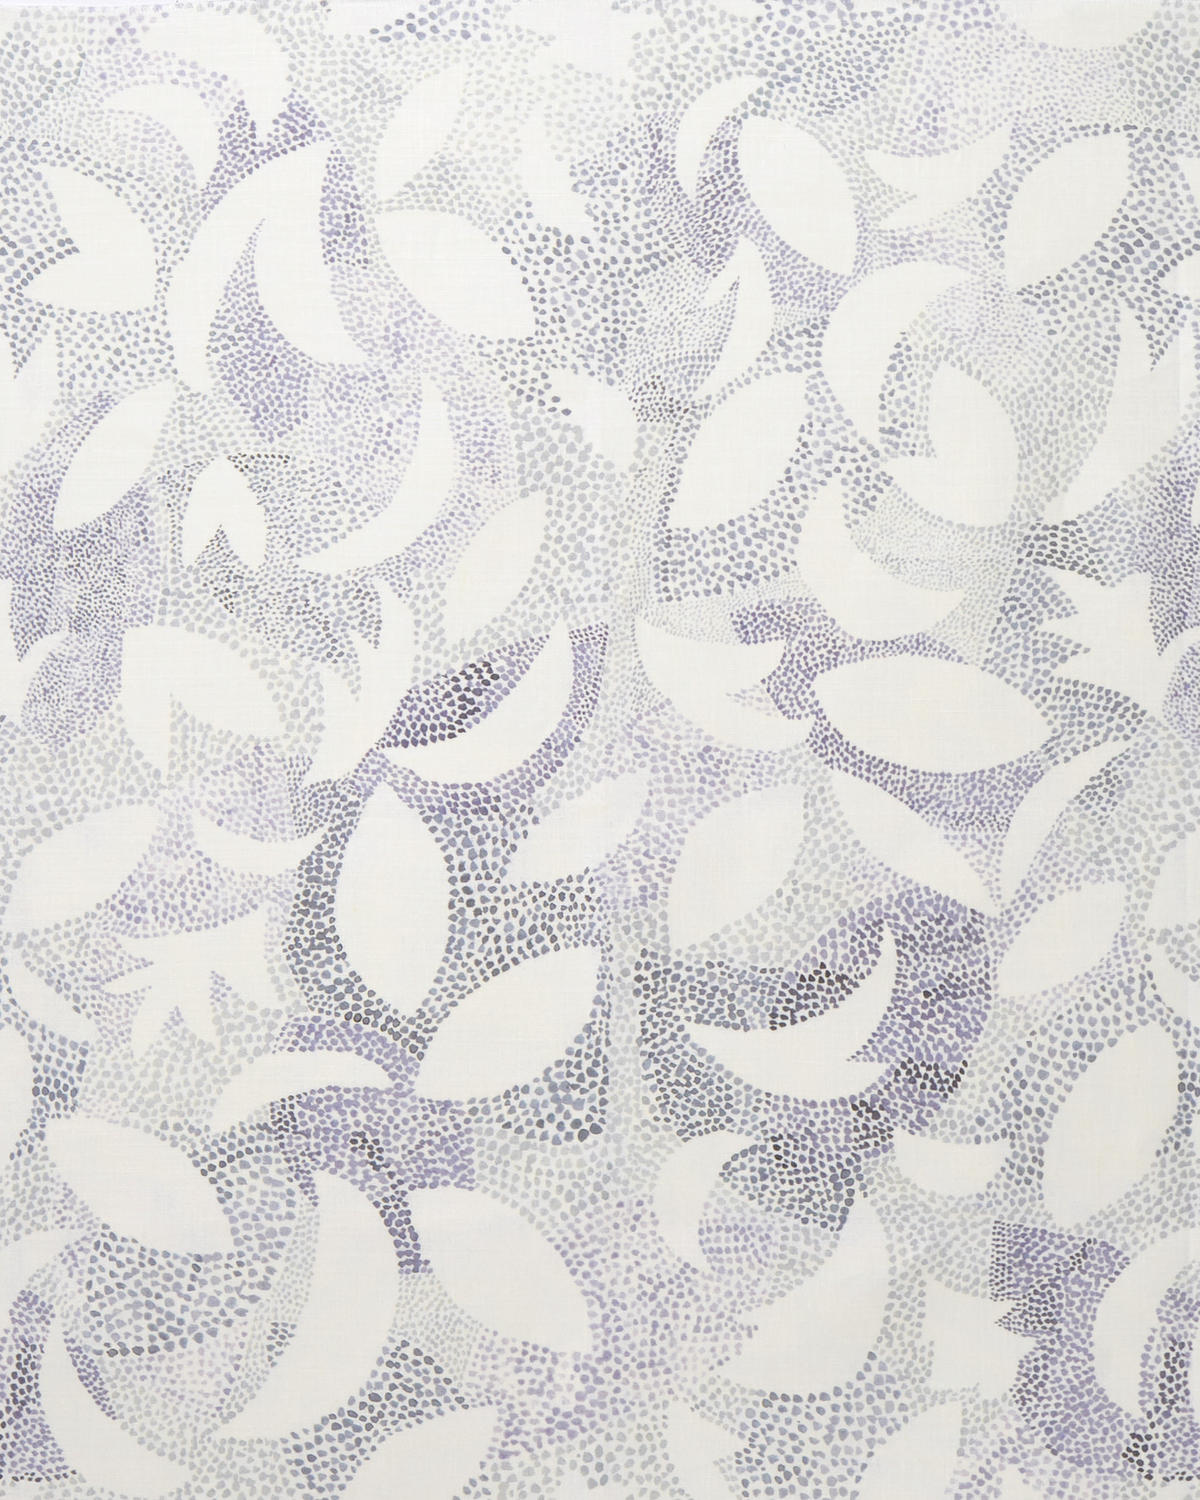 Dotted Leaves Fabric in Gray-Lilac